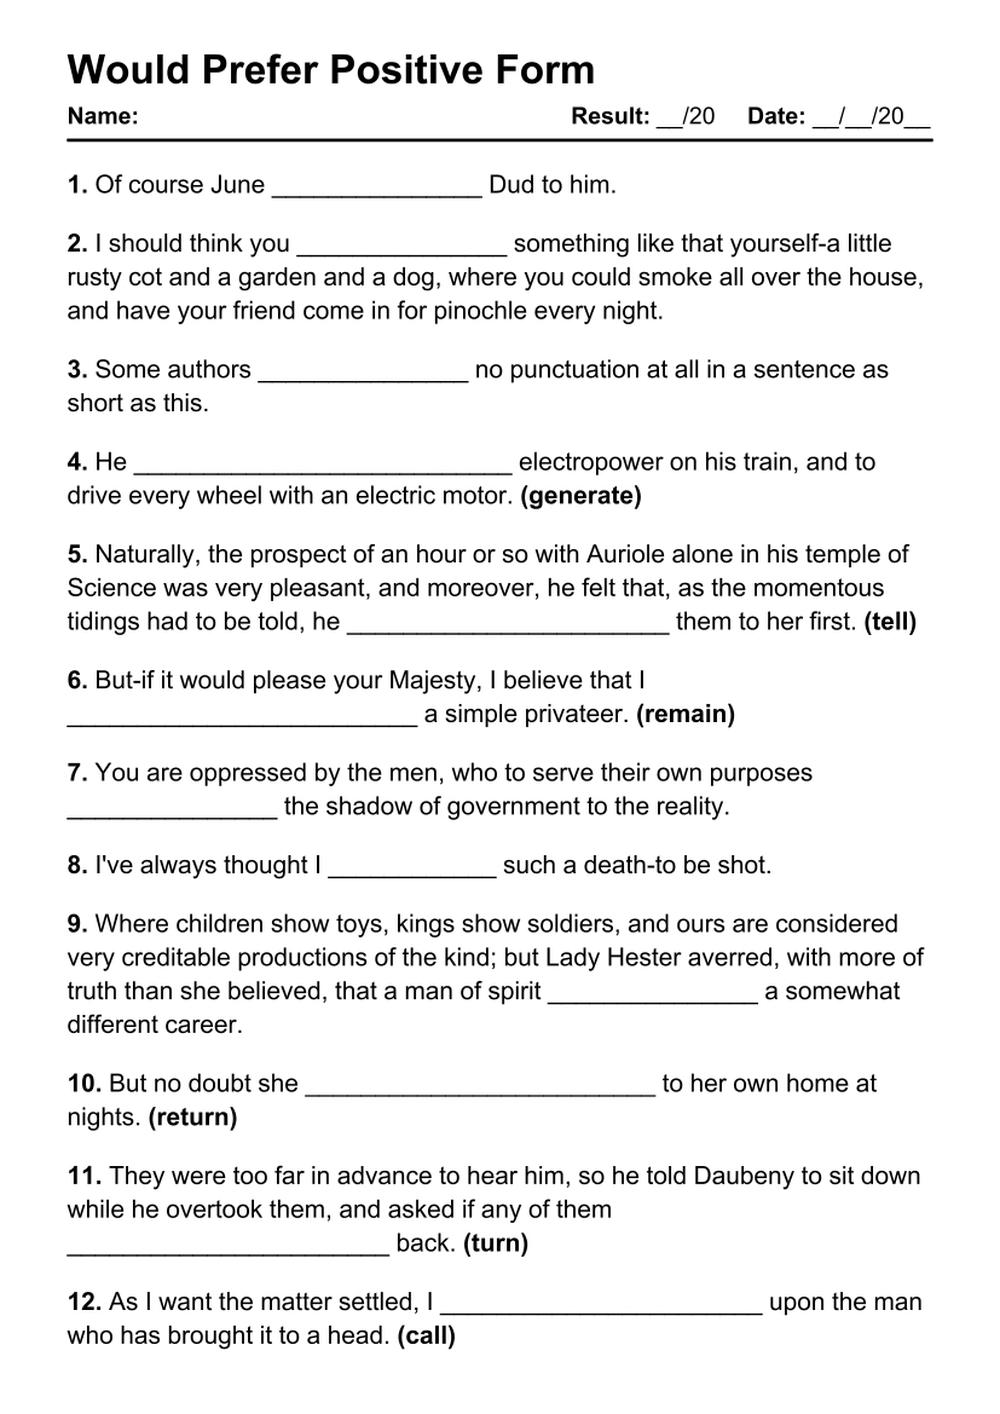 Printable Would Prefer Positive Exercises - PDF Worksheet with Answers - Test 12